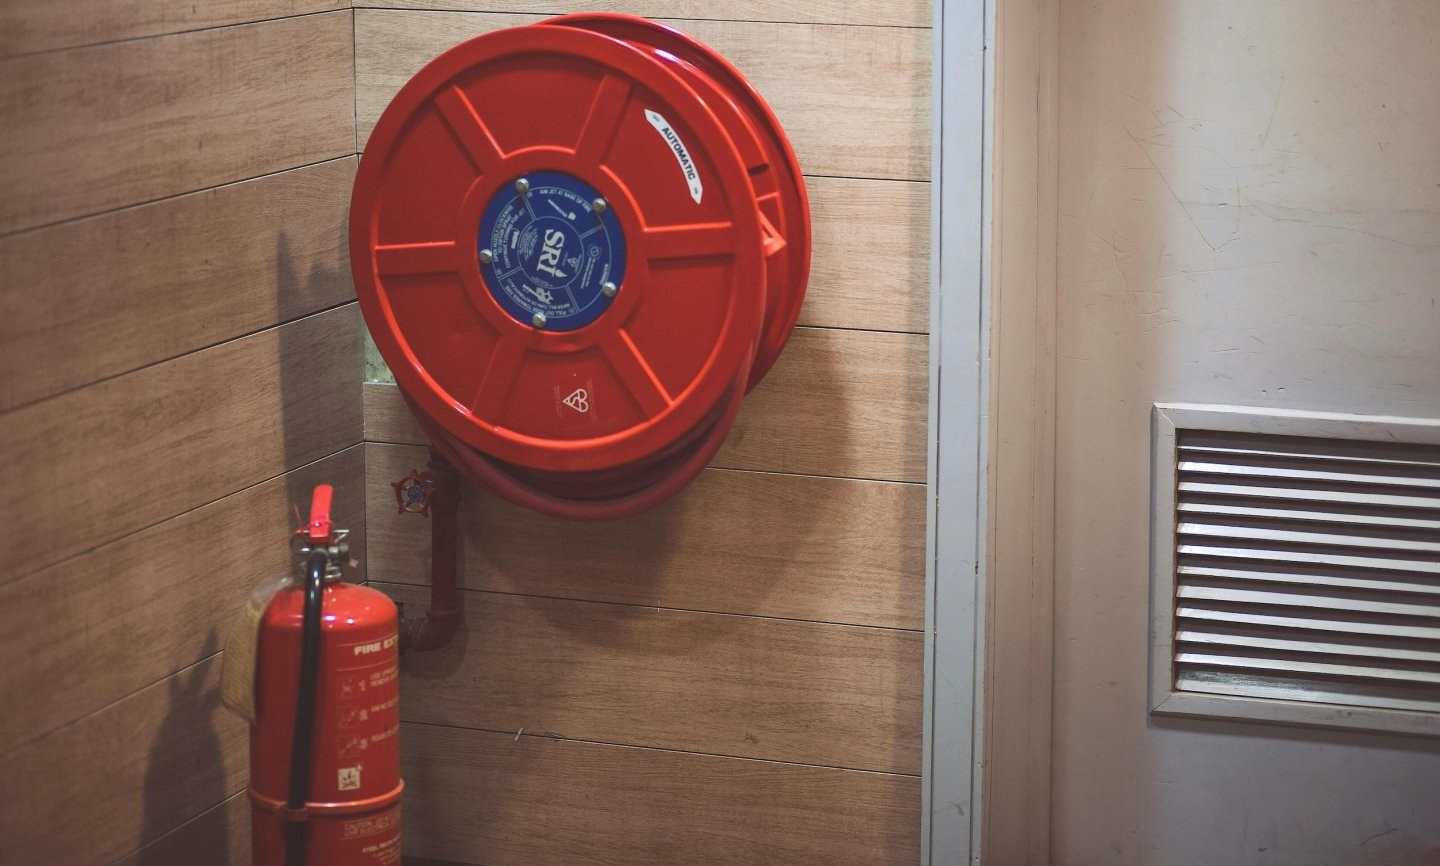 Fire extinguisher sits next to a rolled up fire hose mounted on a wall.